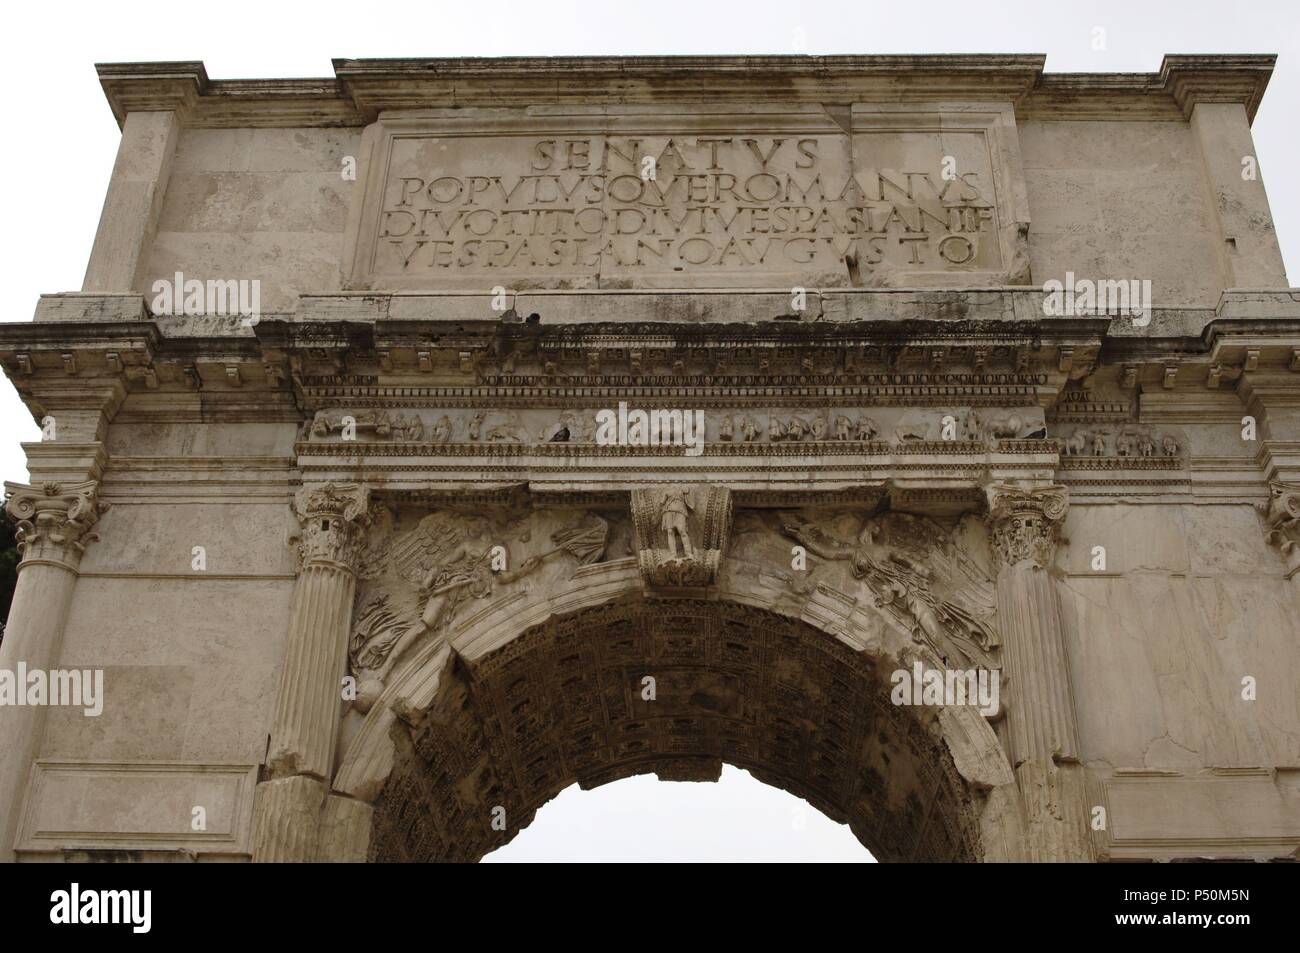 Roman Art. Arch of Titus. Erected in the year 81 to commemorate the conquest of Titus against the Jews. It features carved scenes of the conquest and subsequent destruction of Jerusalem (AD 70). Via Sacra. Roman Forum. Partial view. Rome. Italy. Stock Photo